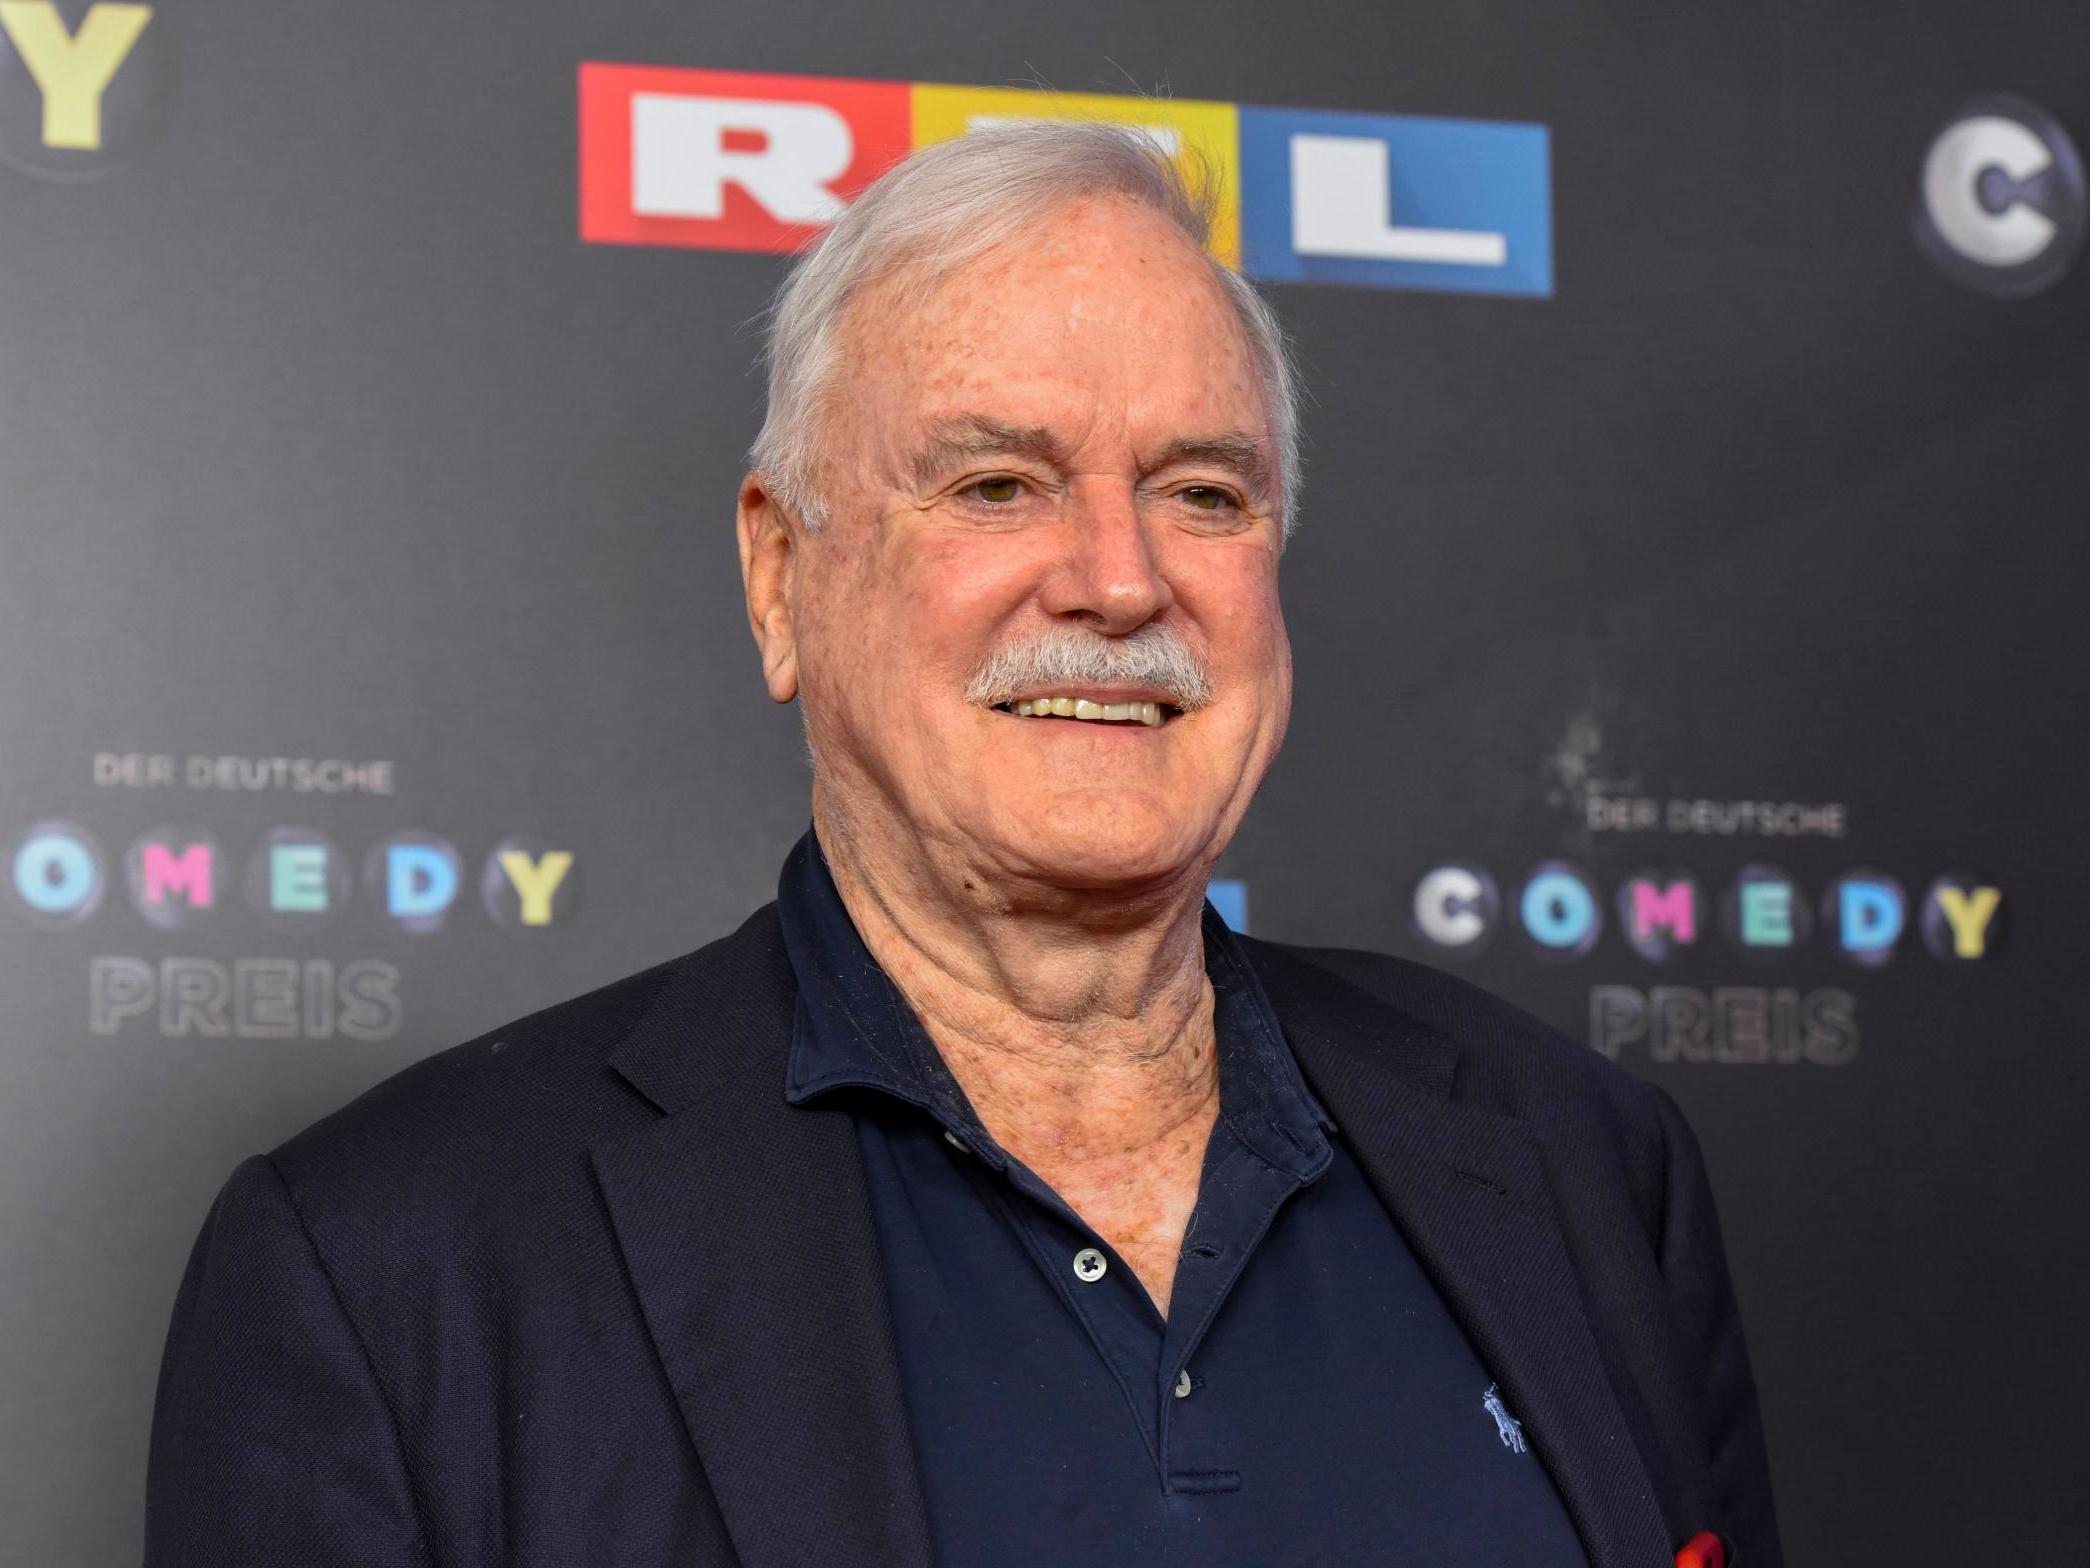 John Cleese at the German Comedy Awards, Cologne in 2019